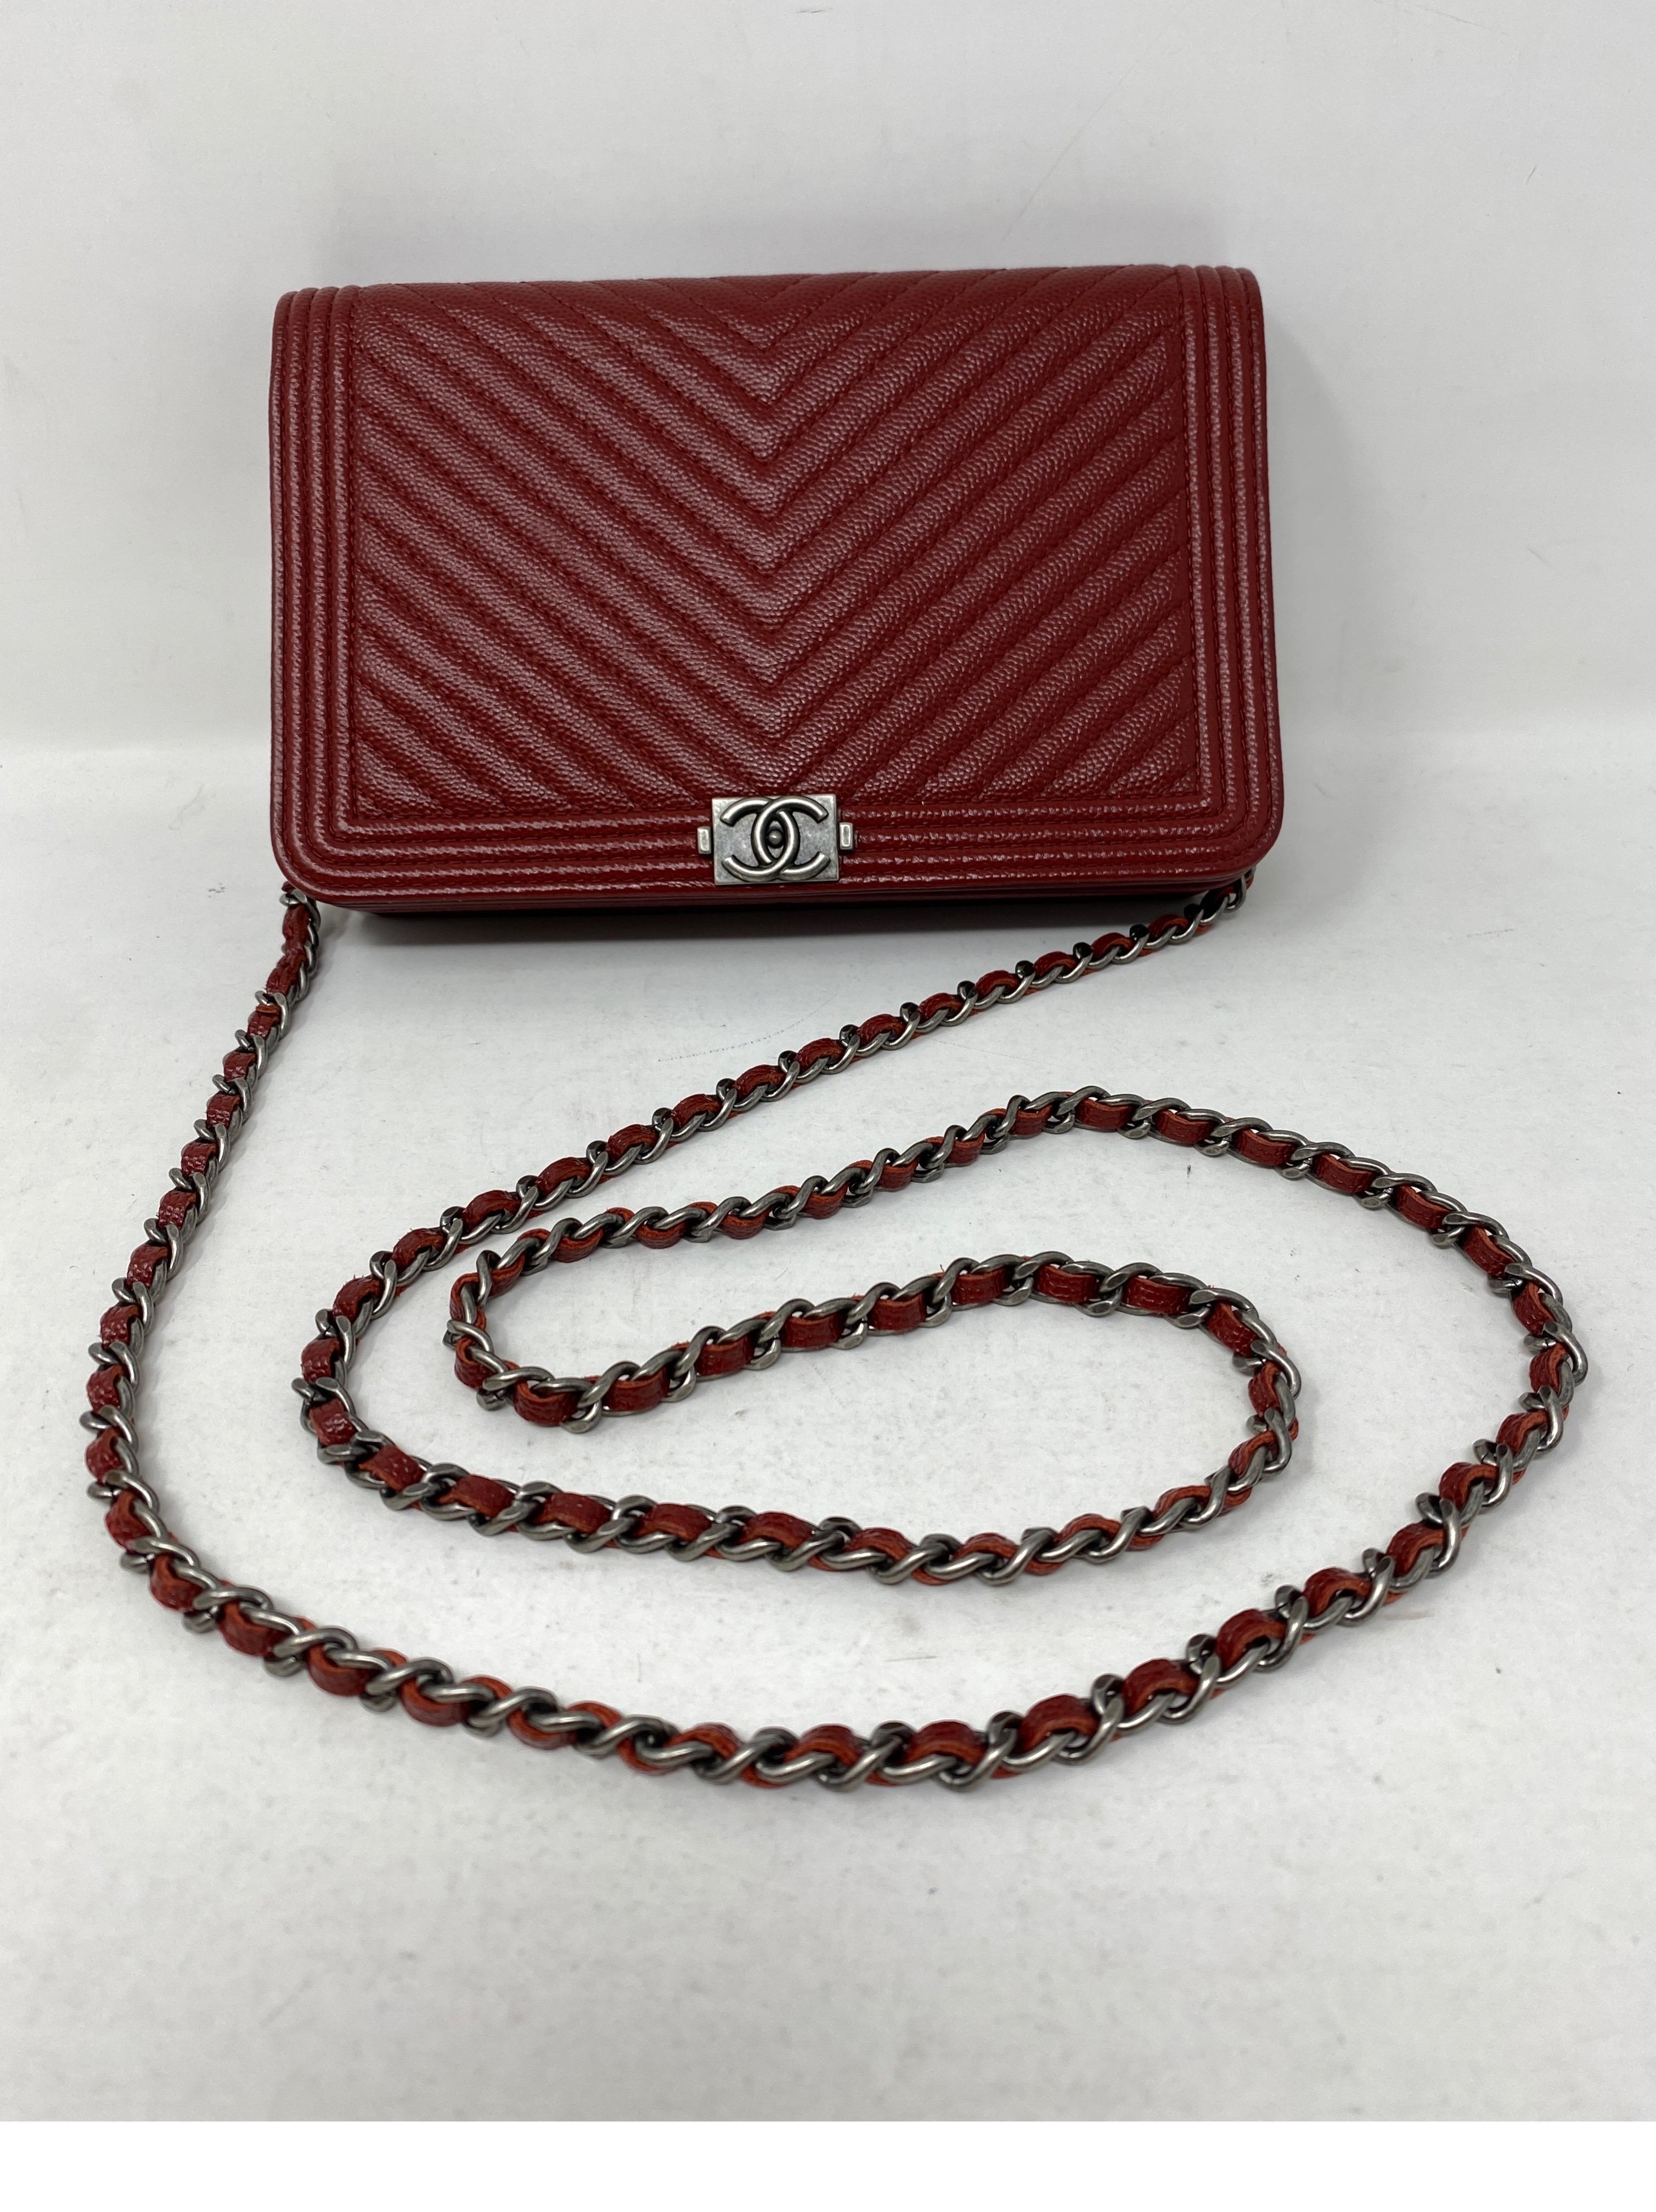 Chanel Burgundy Red Chevron Wallet On A Chain Bag. Crossbody or clutch bag. Excellent condition. Includes authenticity card. Ruthenium hardware. Guaranteed authentic. 